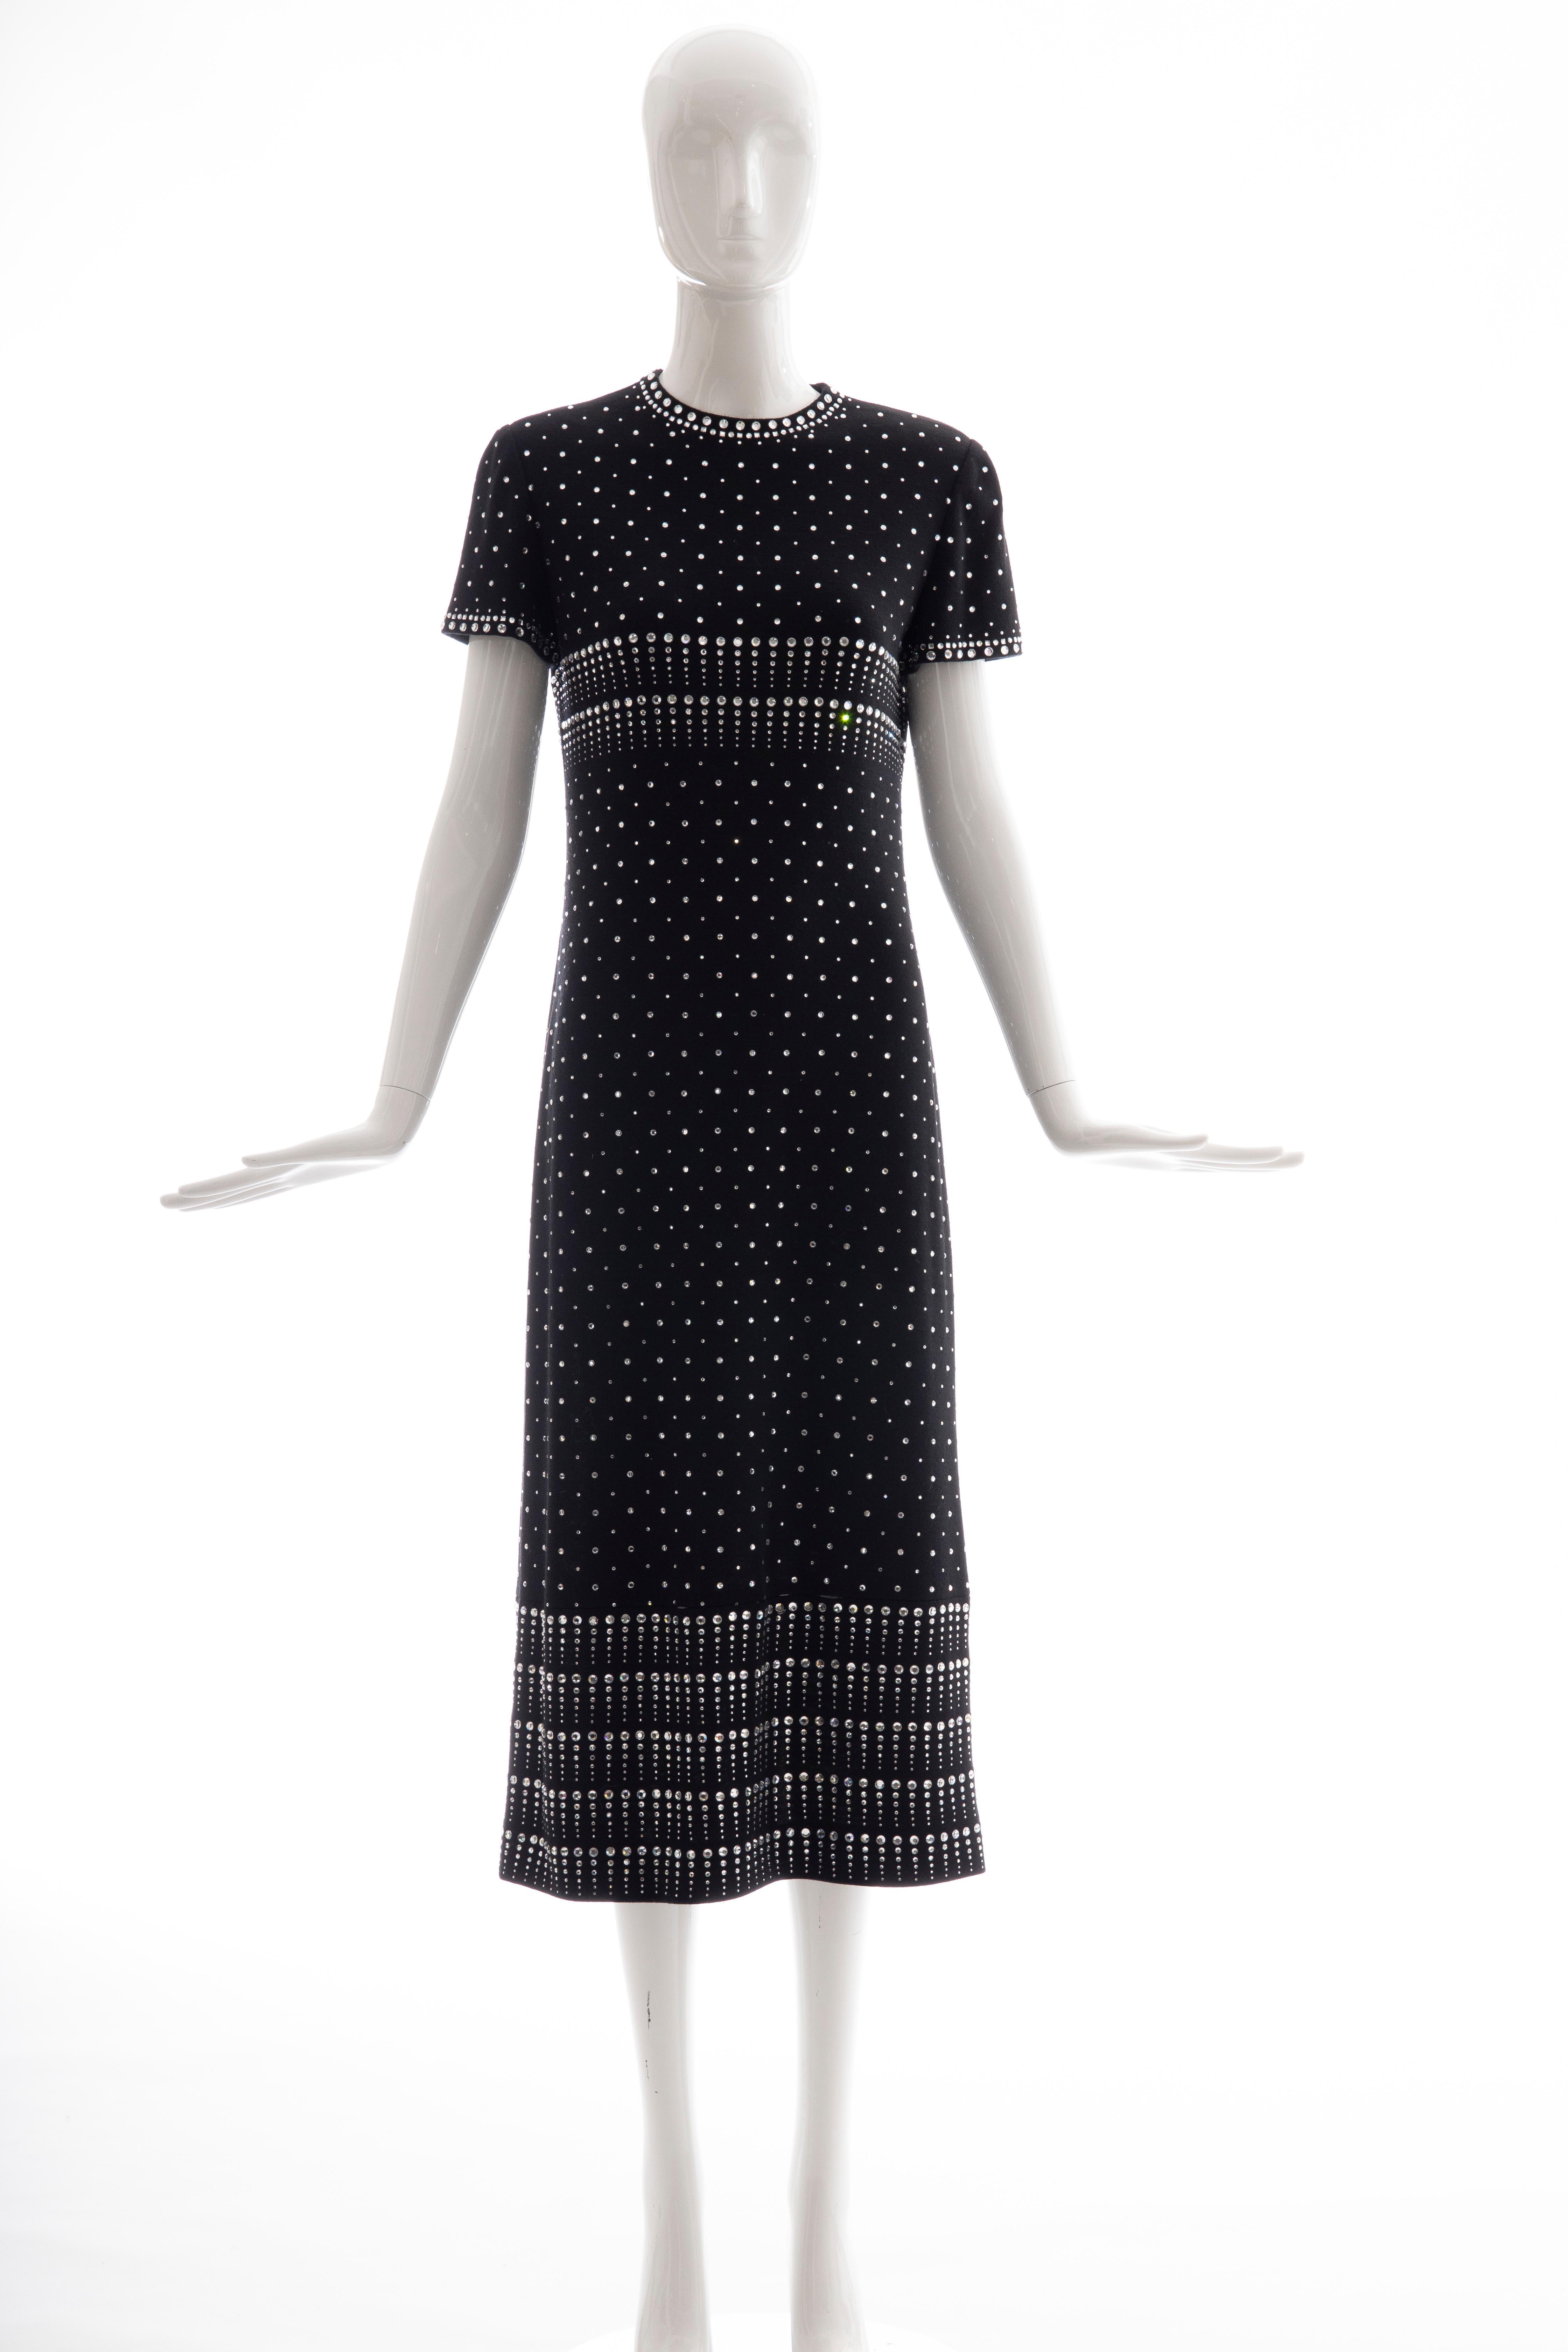 Geoffrey Beene, Fall 1966 black wool knit evening dress with appliquéd rhinestines, cap sleeve with back zip and hook-and-eye closure.

Archived at the Museum of Fine Art in Boston and the Museum at FIT.

US. 8
Bust: 33, Waist: 32, Hips: 40,